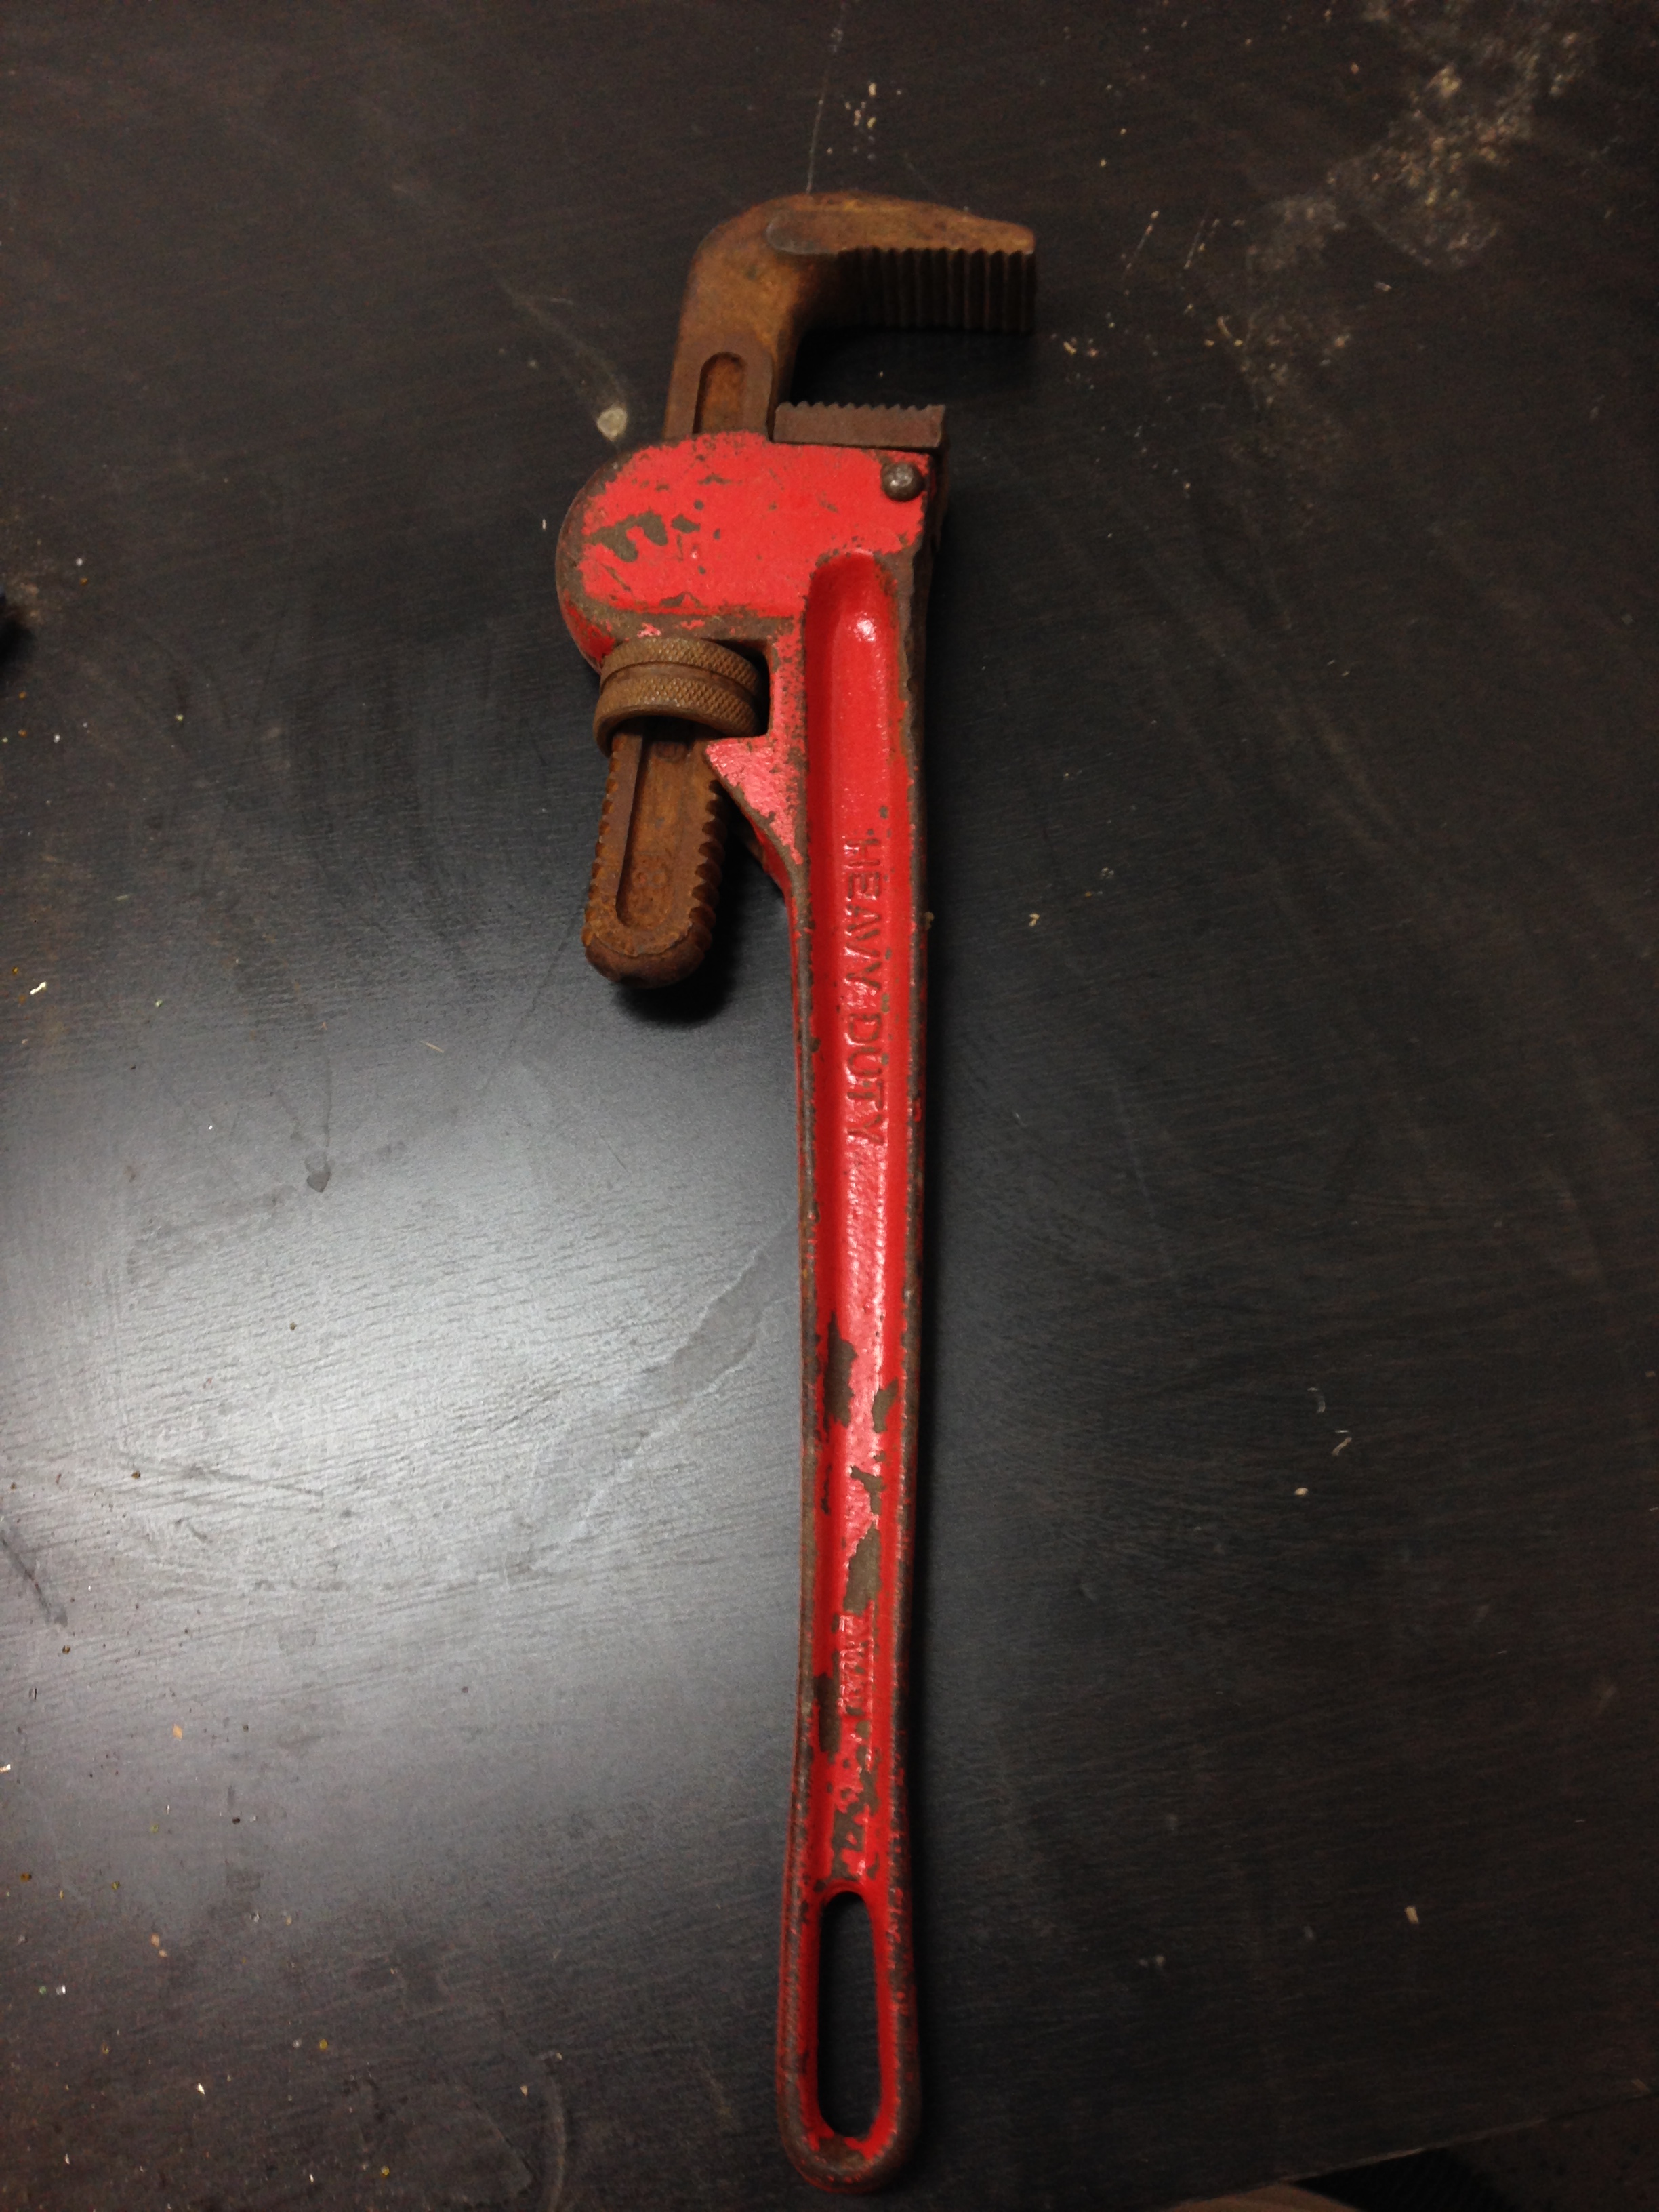 Pipe Wrench Restoration - Though it's a really basic project ...